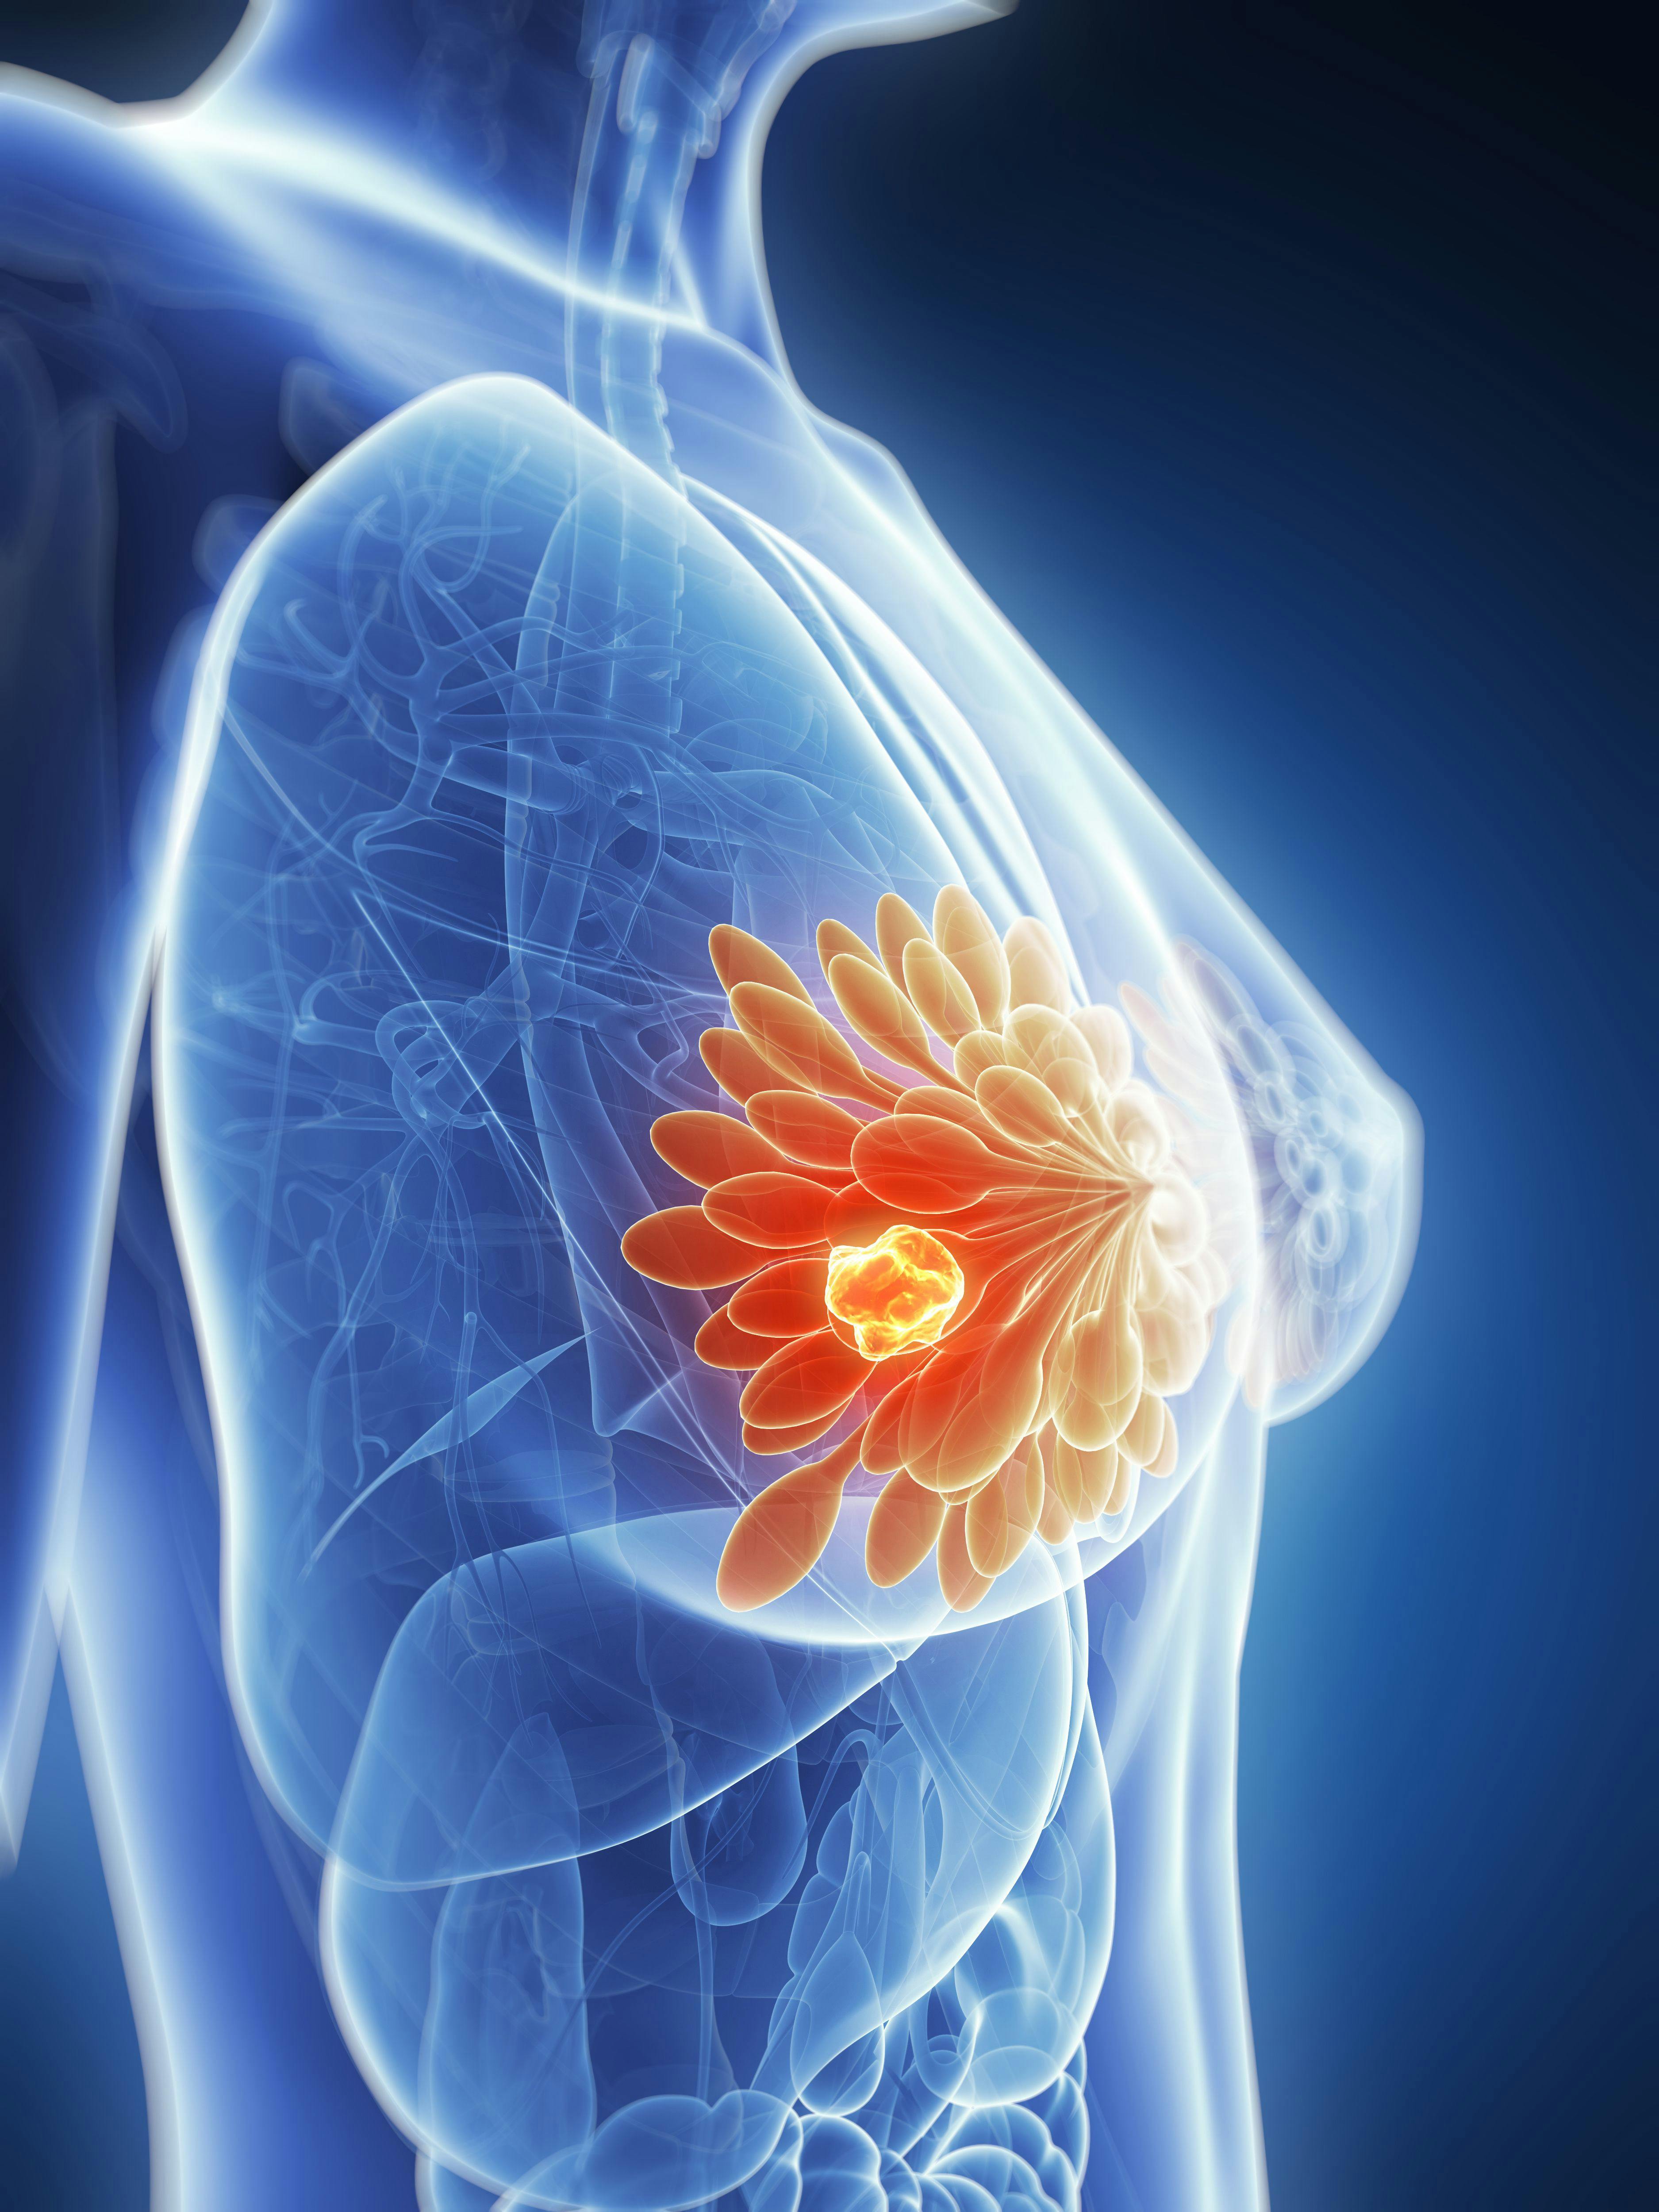 Patients with HER2-positive breast cancer appeared to derive a higher overall survival benefit after being treated with pyrotinib plus capecitabine vs lapatinib plus capecitabine.